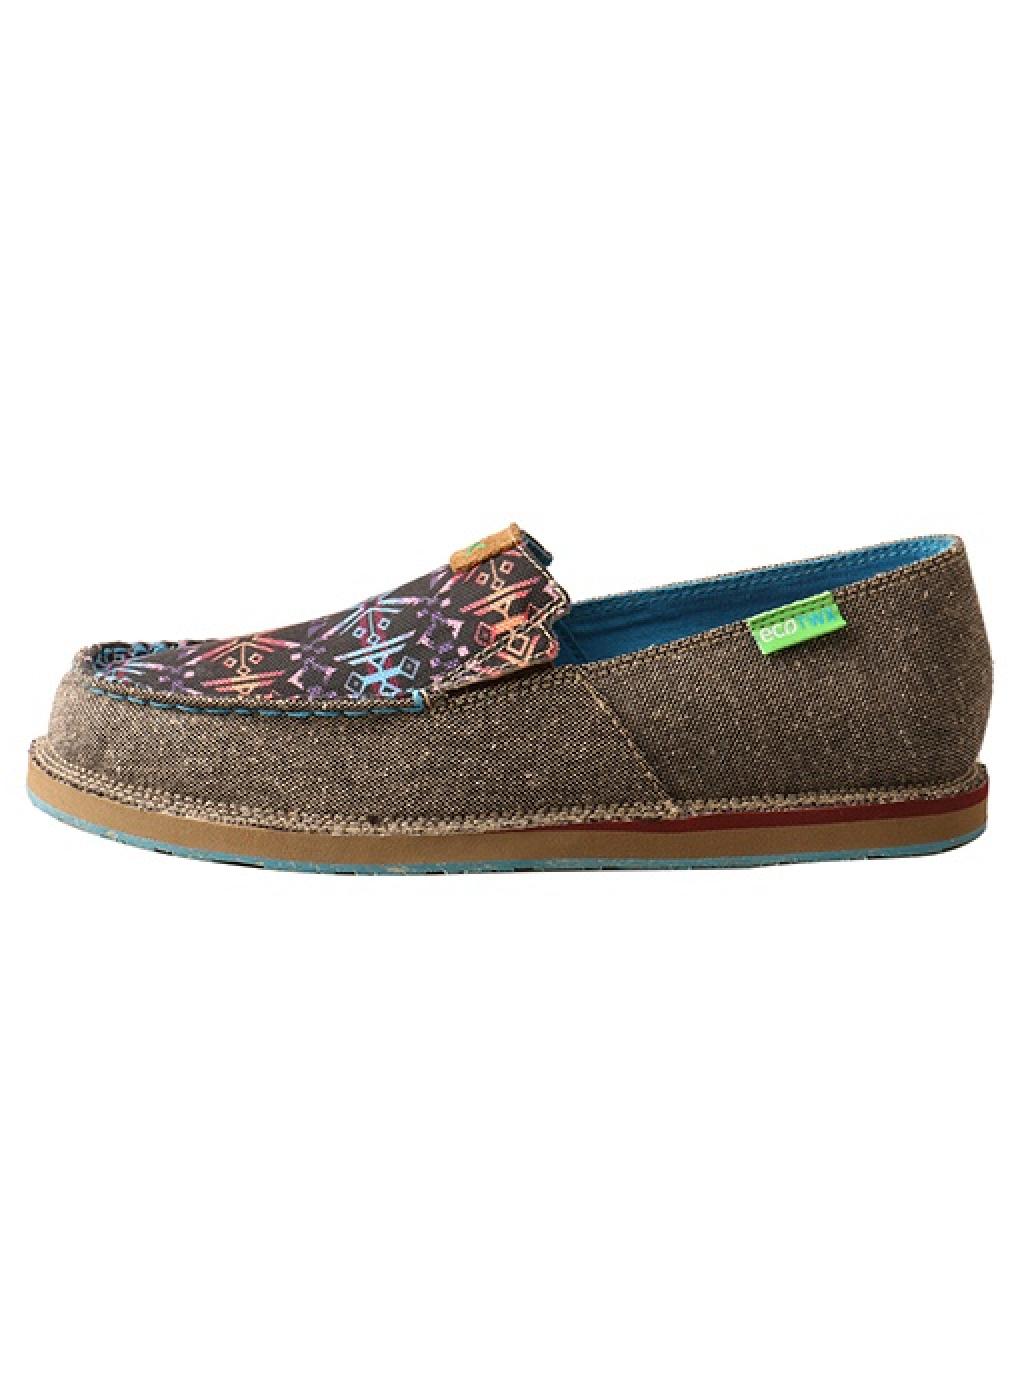 Twisted X Women's Slip-On Loafer Profile View